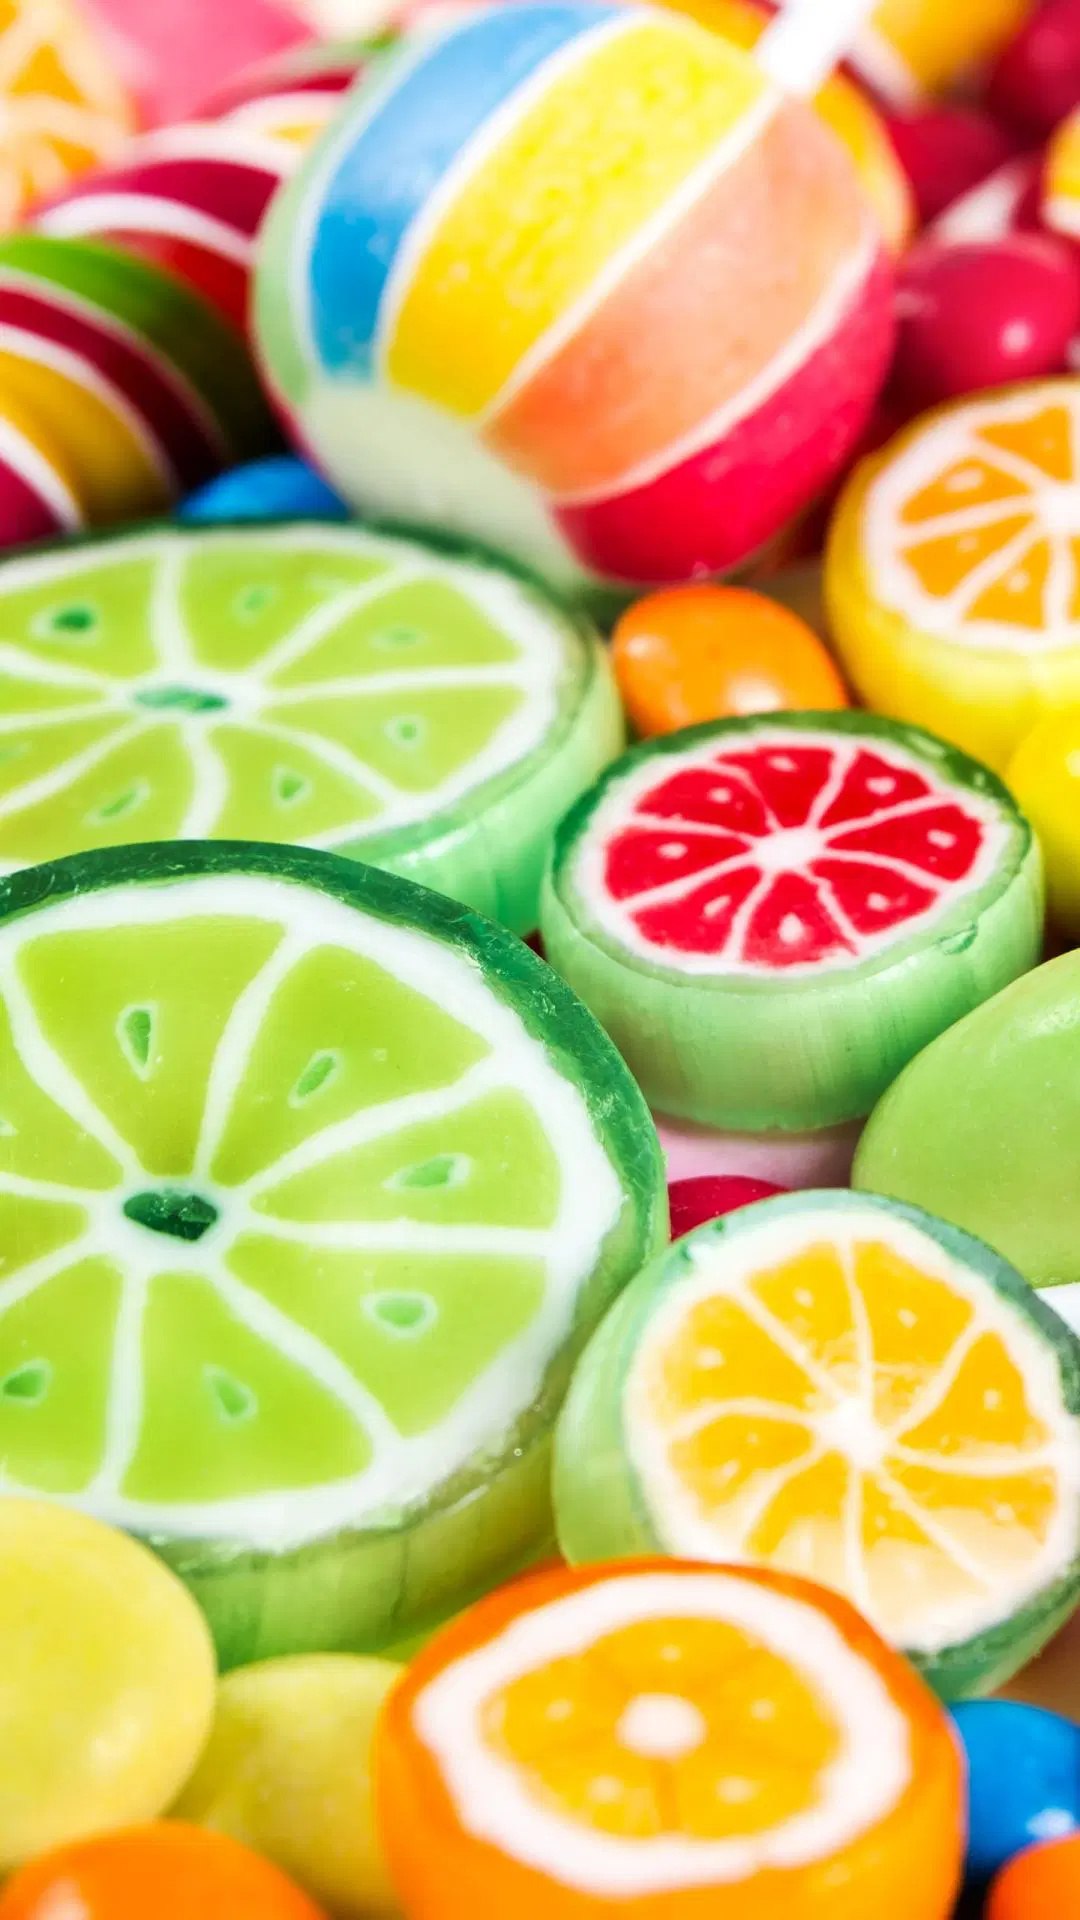 Food candy wallpaper, Vibrant and delicious, High definition delight, Sweet cravings, 1080x1920 Full HD Phone